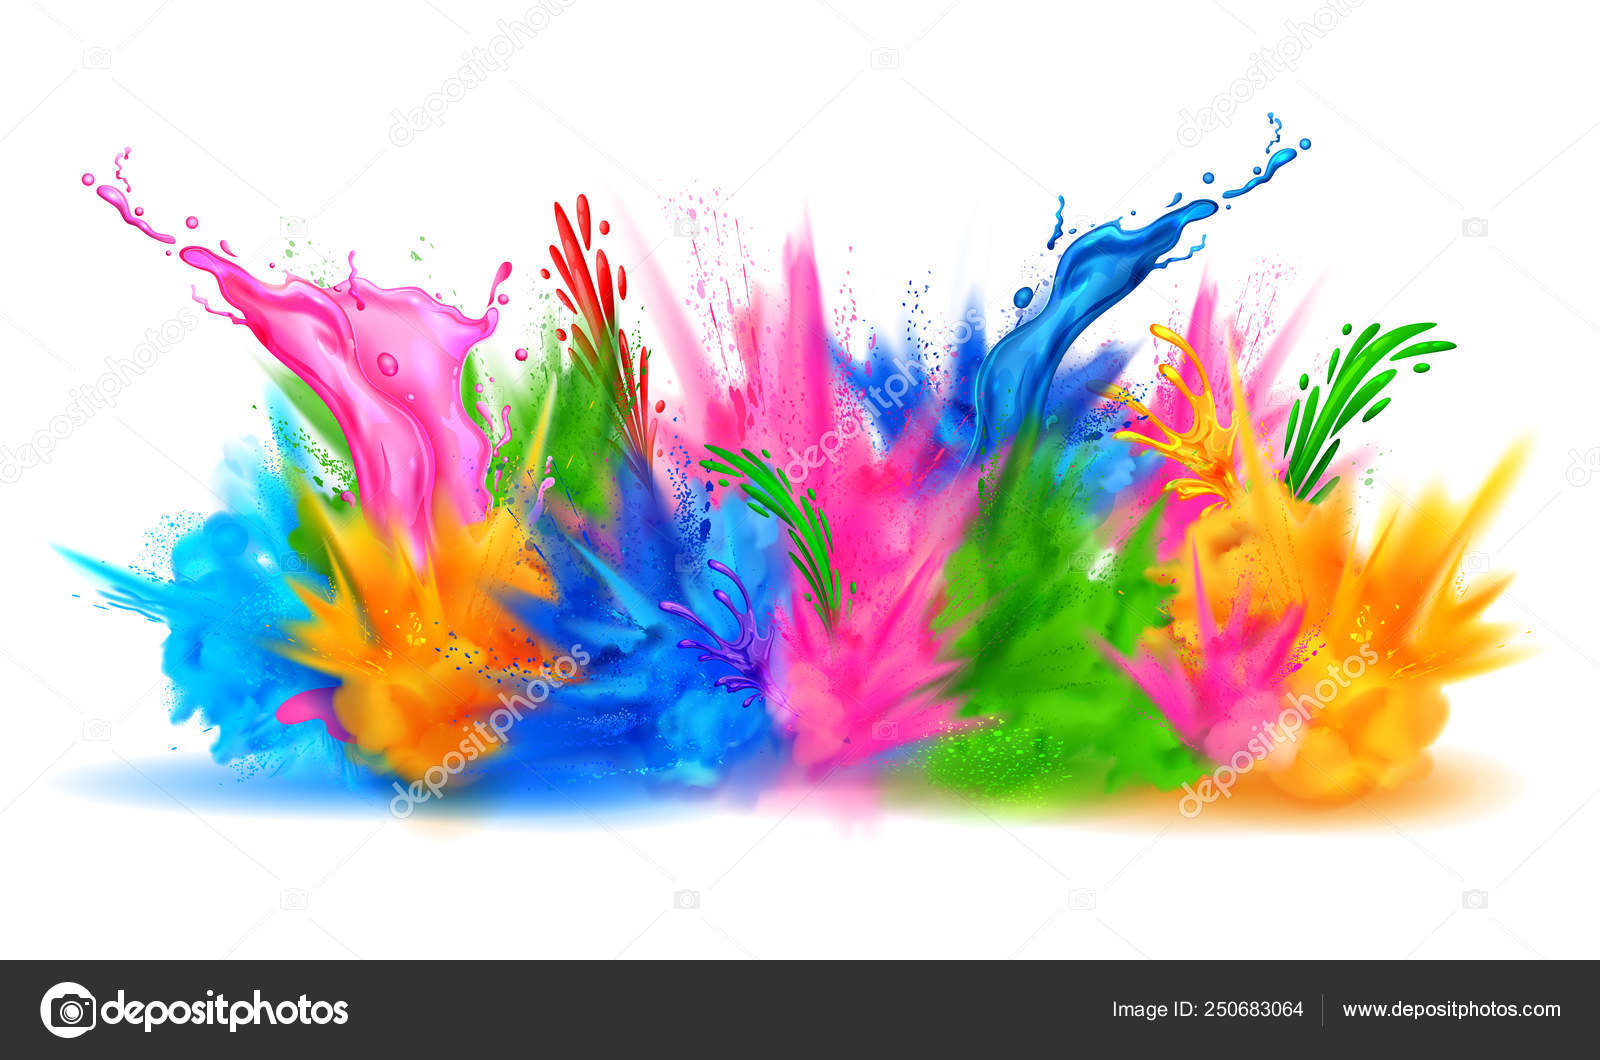 Colorful Festival Background Vector - 1600x1060 Wallpaper 